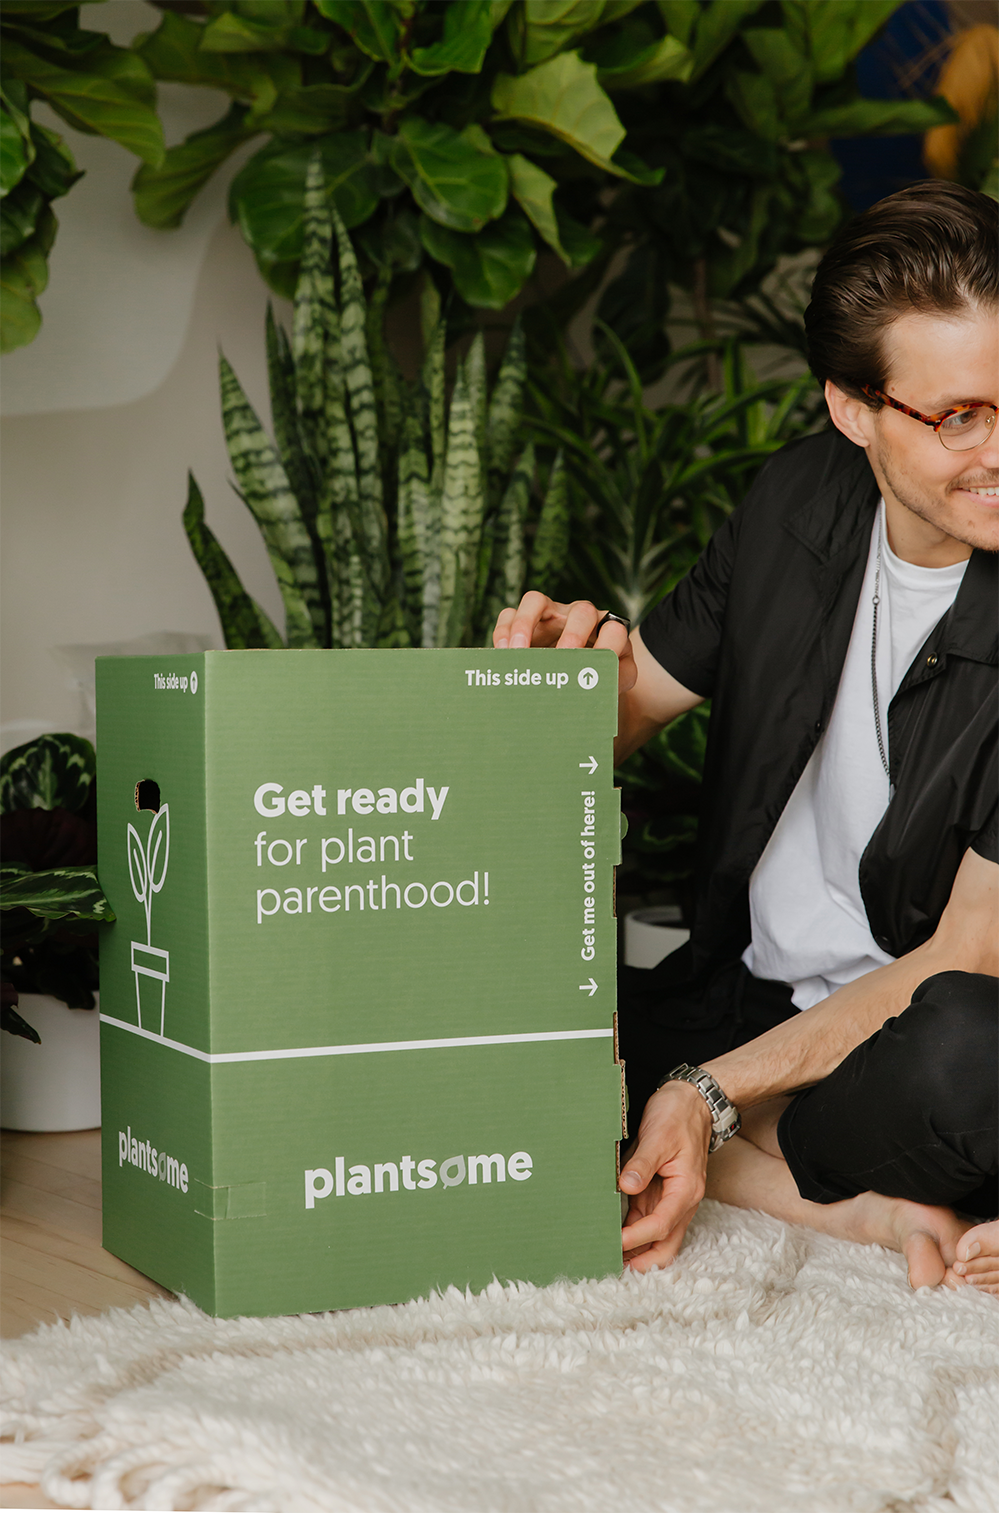 Plantsome launches in Alberta! Tropical plants can now be delivered all across the province